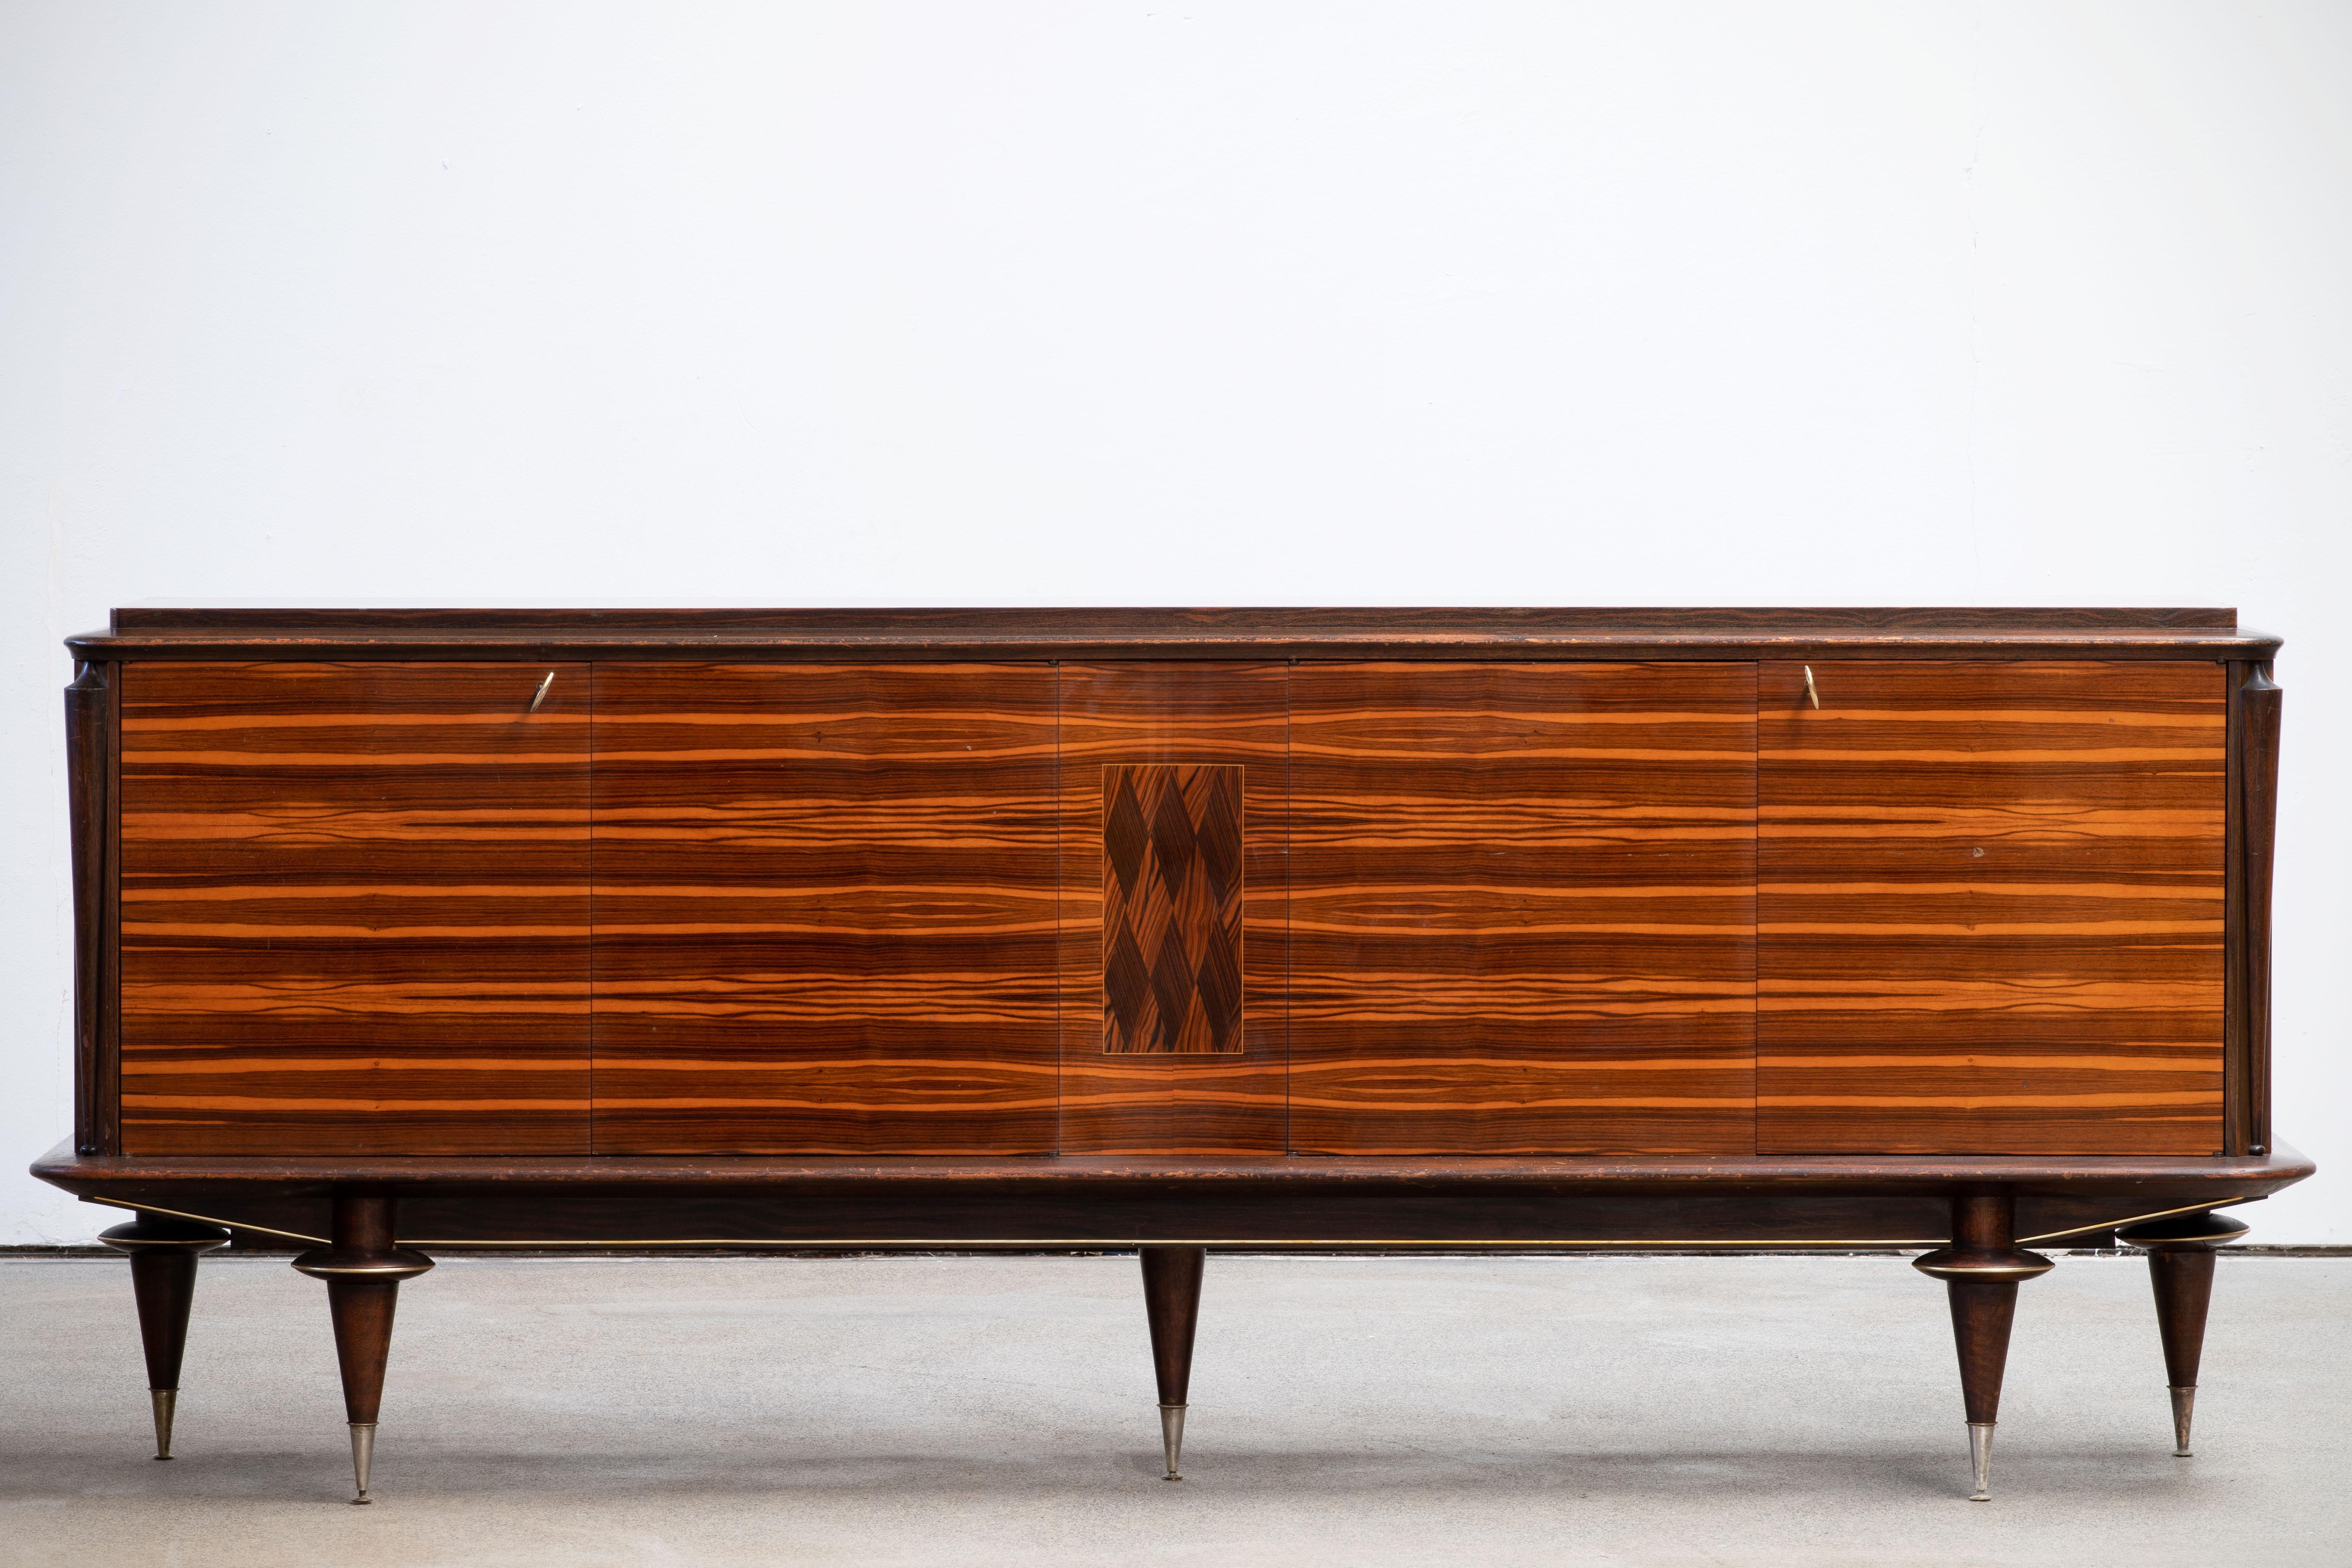 French Art Deco sideboard, credenza. The sideboard features stunning Macassar wood grain with a geometric pattern in the center. It offers ample storage, with shelve behind the doors. Both sides of the cabinet lock, and two original keys are